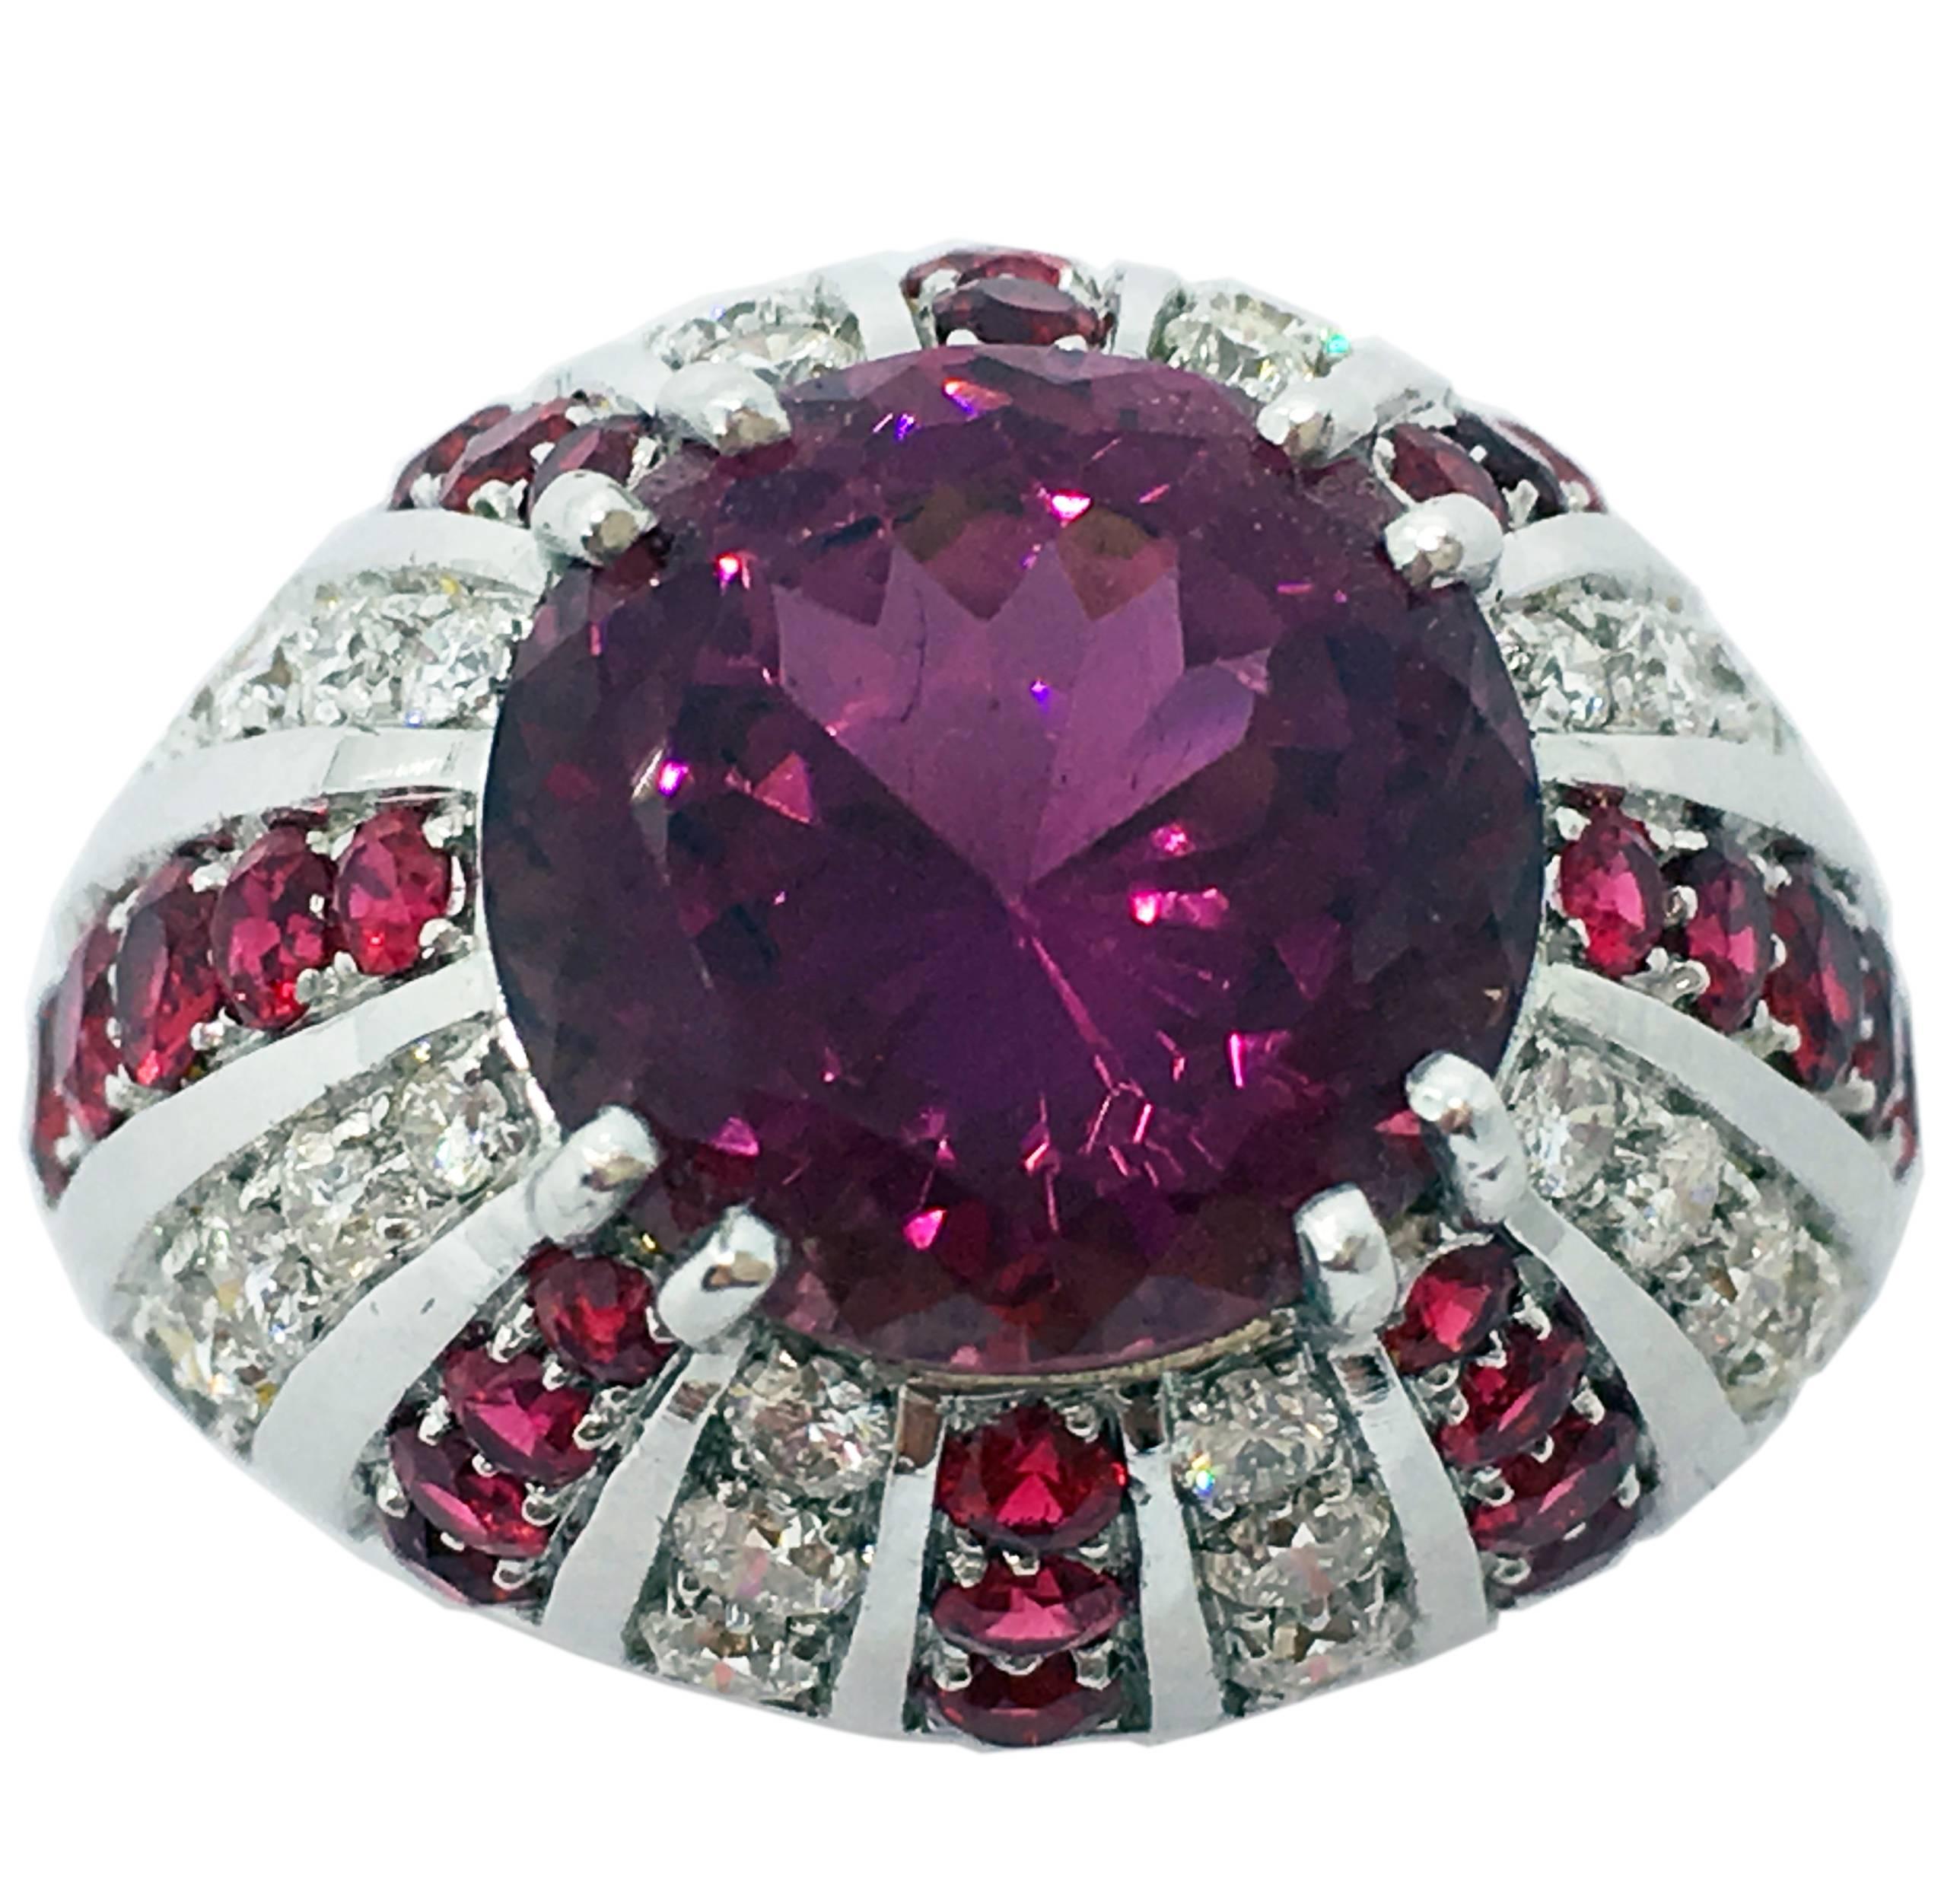 One-of-a-kind Original Sixties Cocktail Dome Ring featuring an unusual 5.77Carat Brilliant Cut natural, not enhanced, extraordinary Burgundy, Purplish Red Tourmaline(diameter about 0.444inches, 11.30mm) in an 1.24 Carat White Diamond, 1.94 Carat